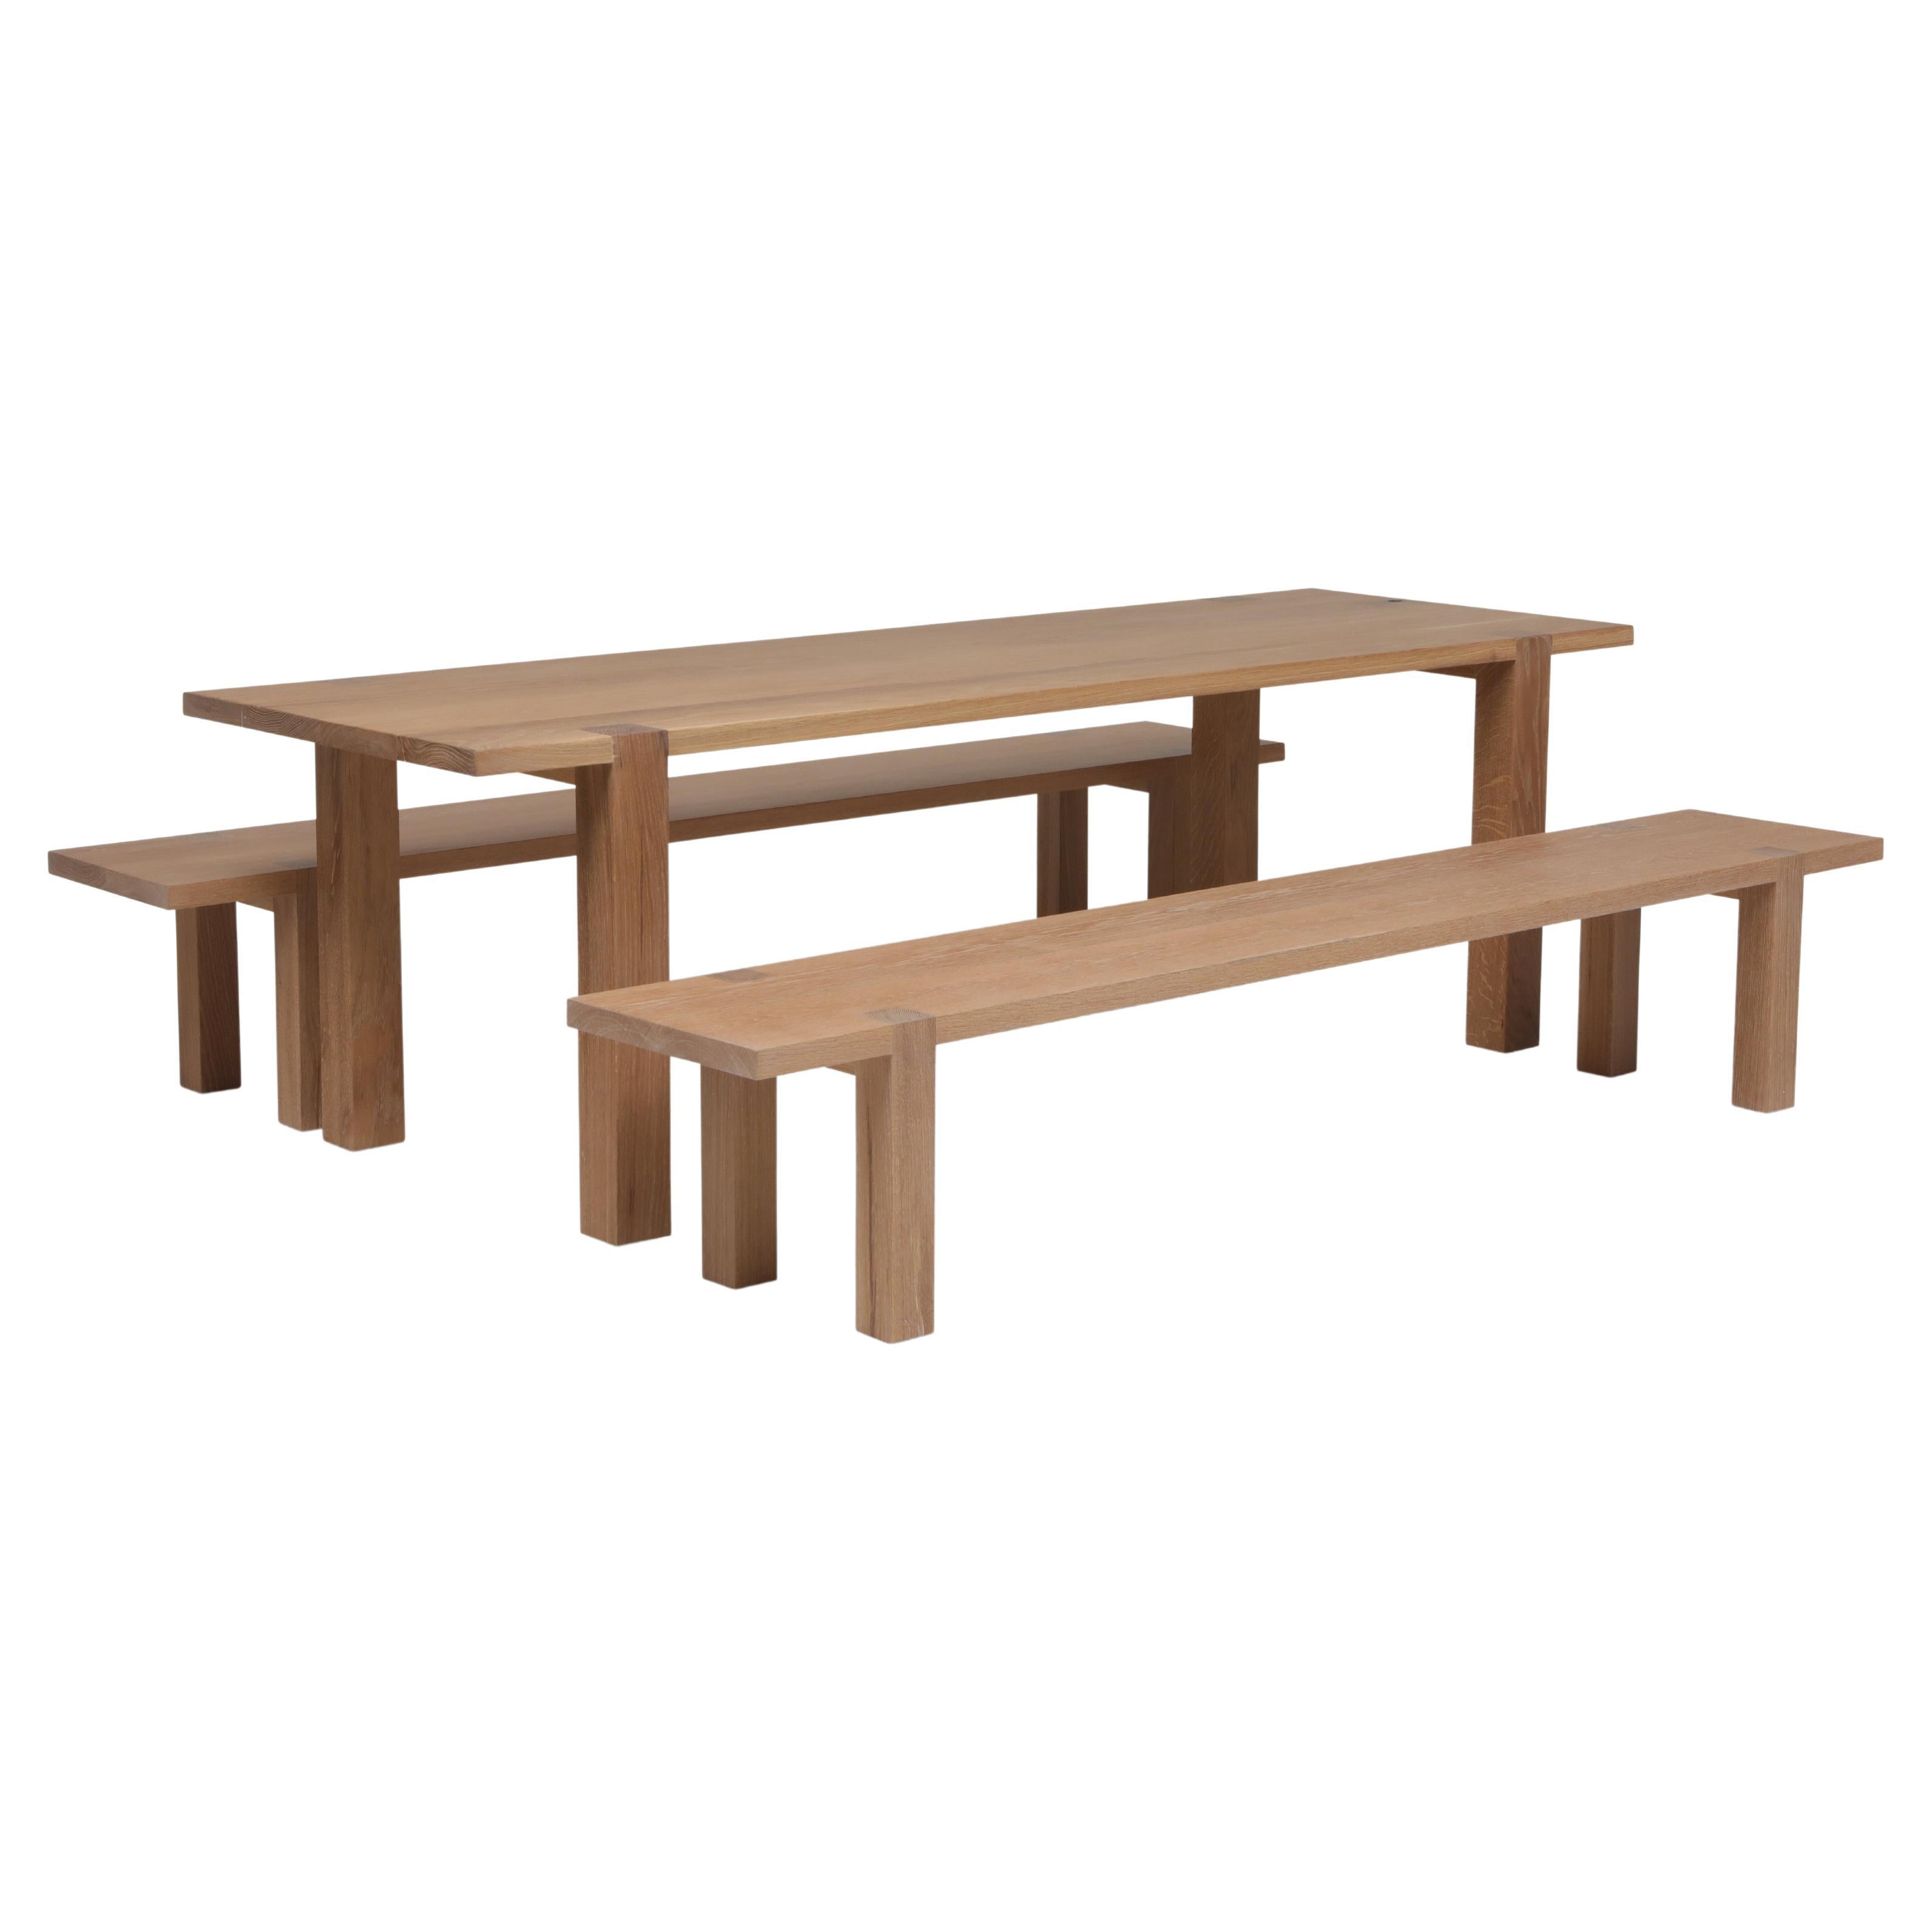 Solid White Oak Farm Style Dining Table with Two Solid White Oak Benches